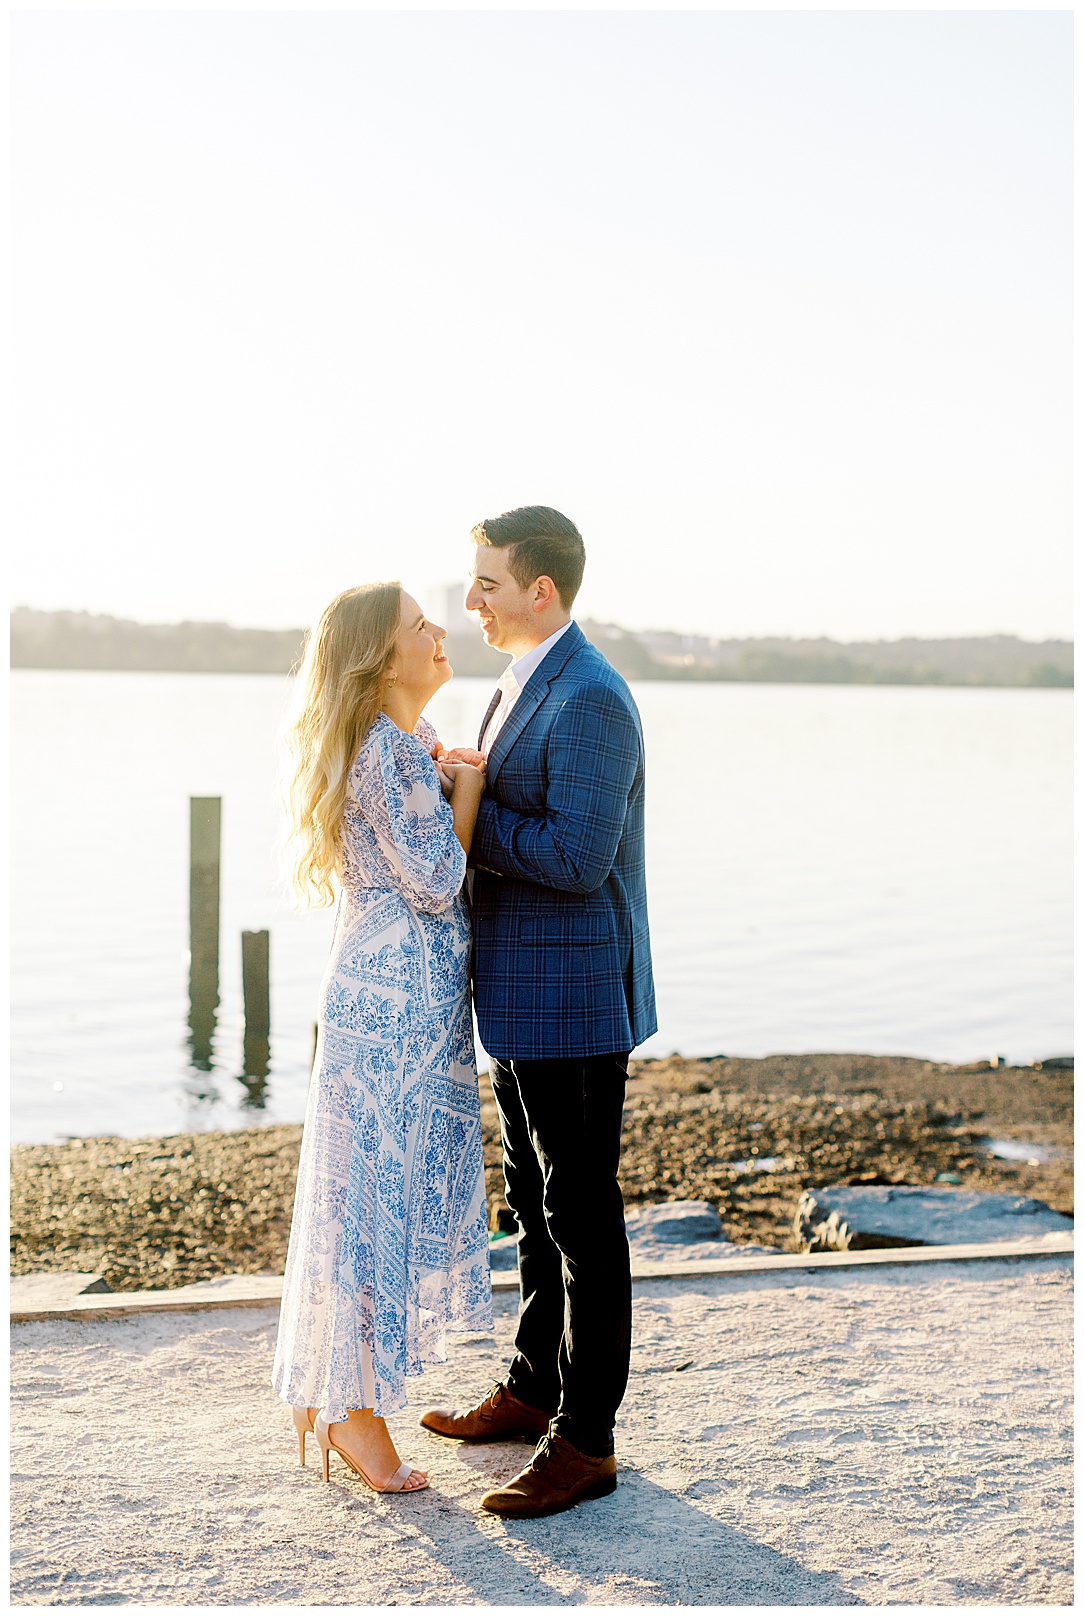 Old Town Alexandria Waterfront - Sunrise Engagement Session near DC